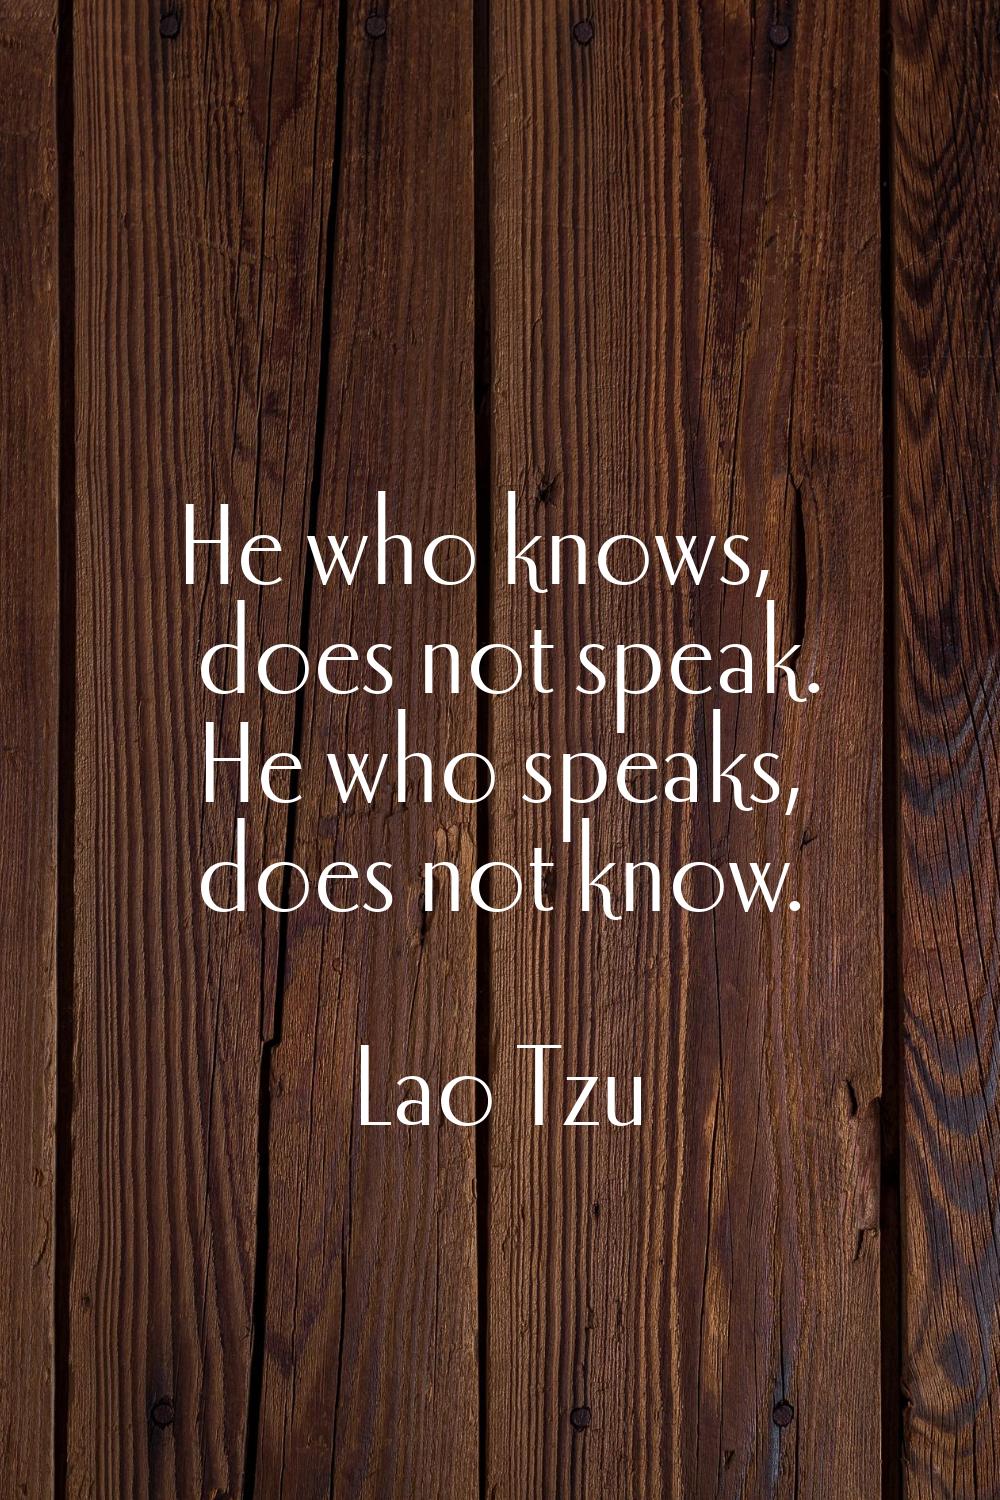 He who knows, does not speak. He who speaks, does not know.